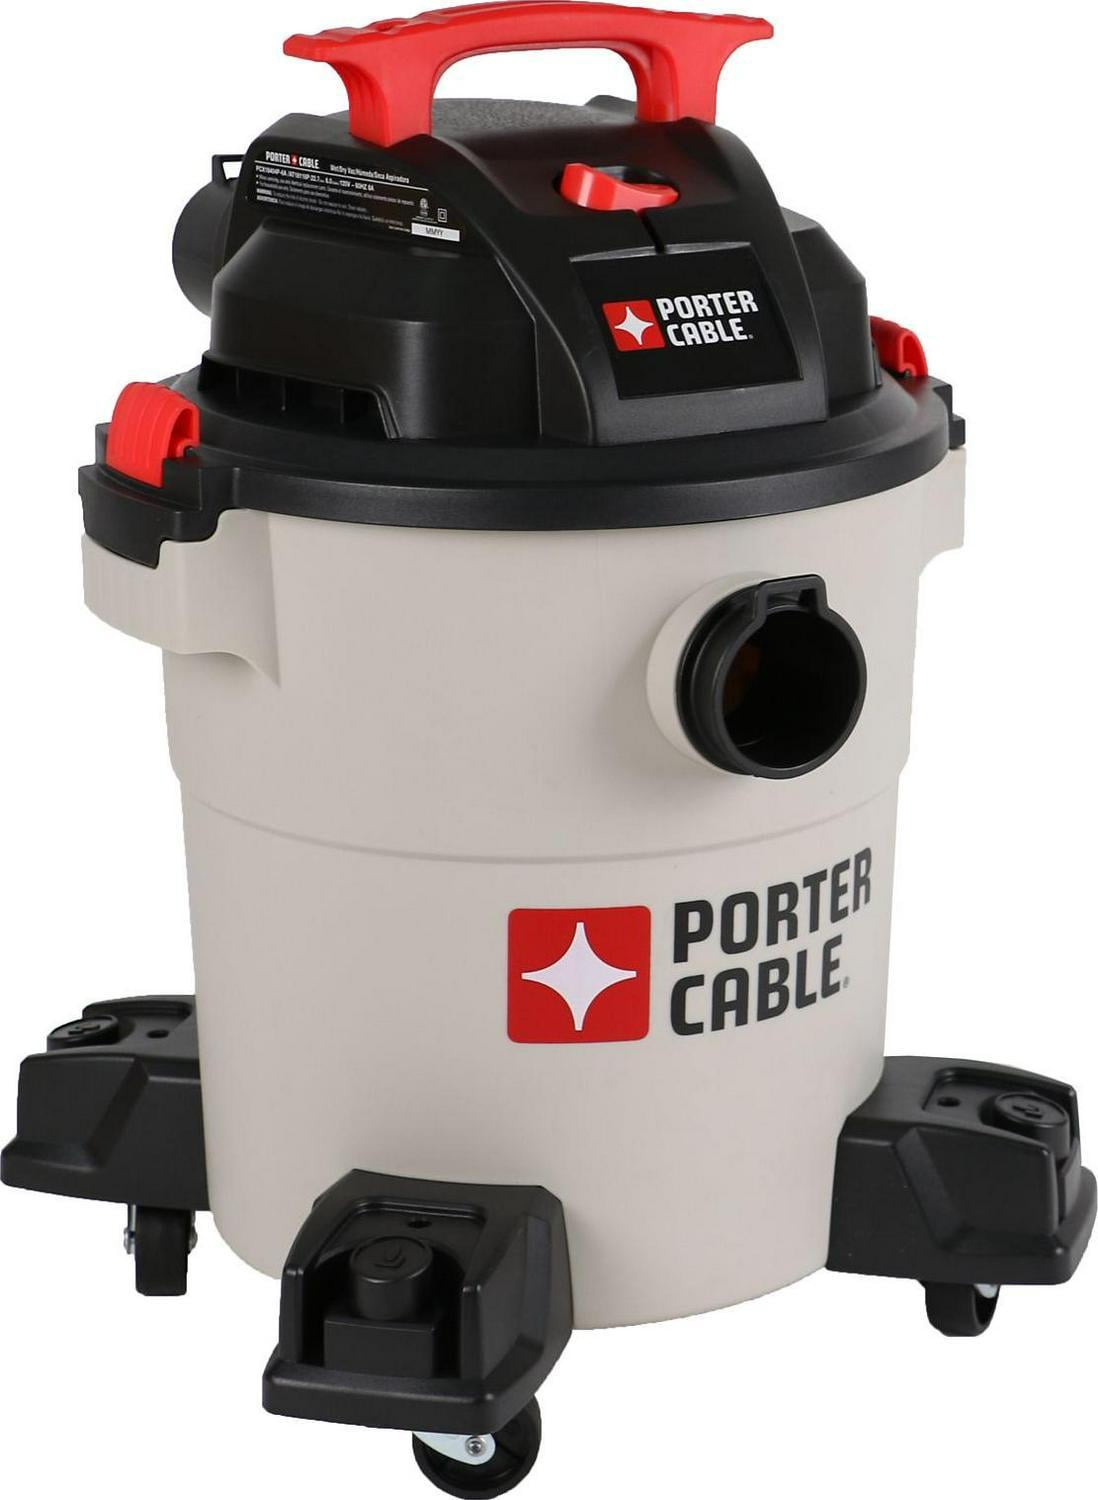 PORTER-CABLE PCX18406-5B 5 Gallon 4HP Wet/Dry Shop Vac Vacuum with Hose and 